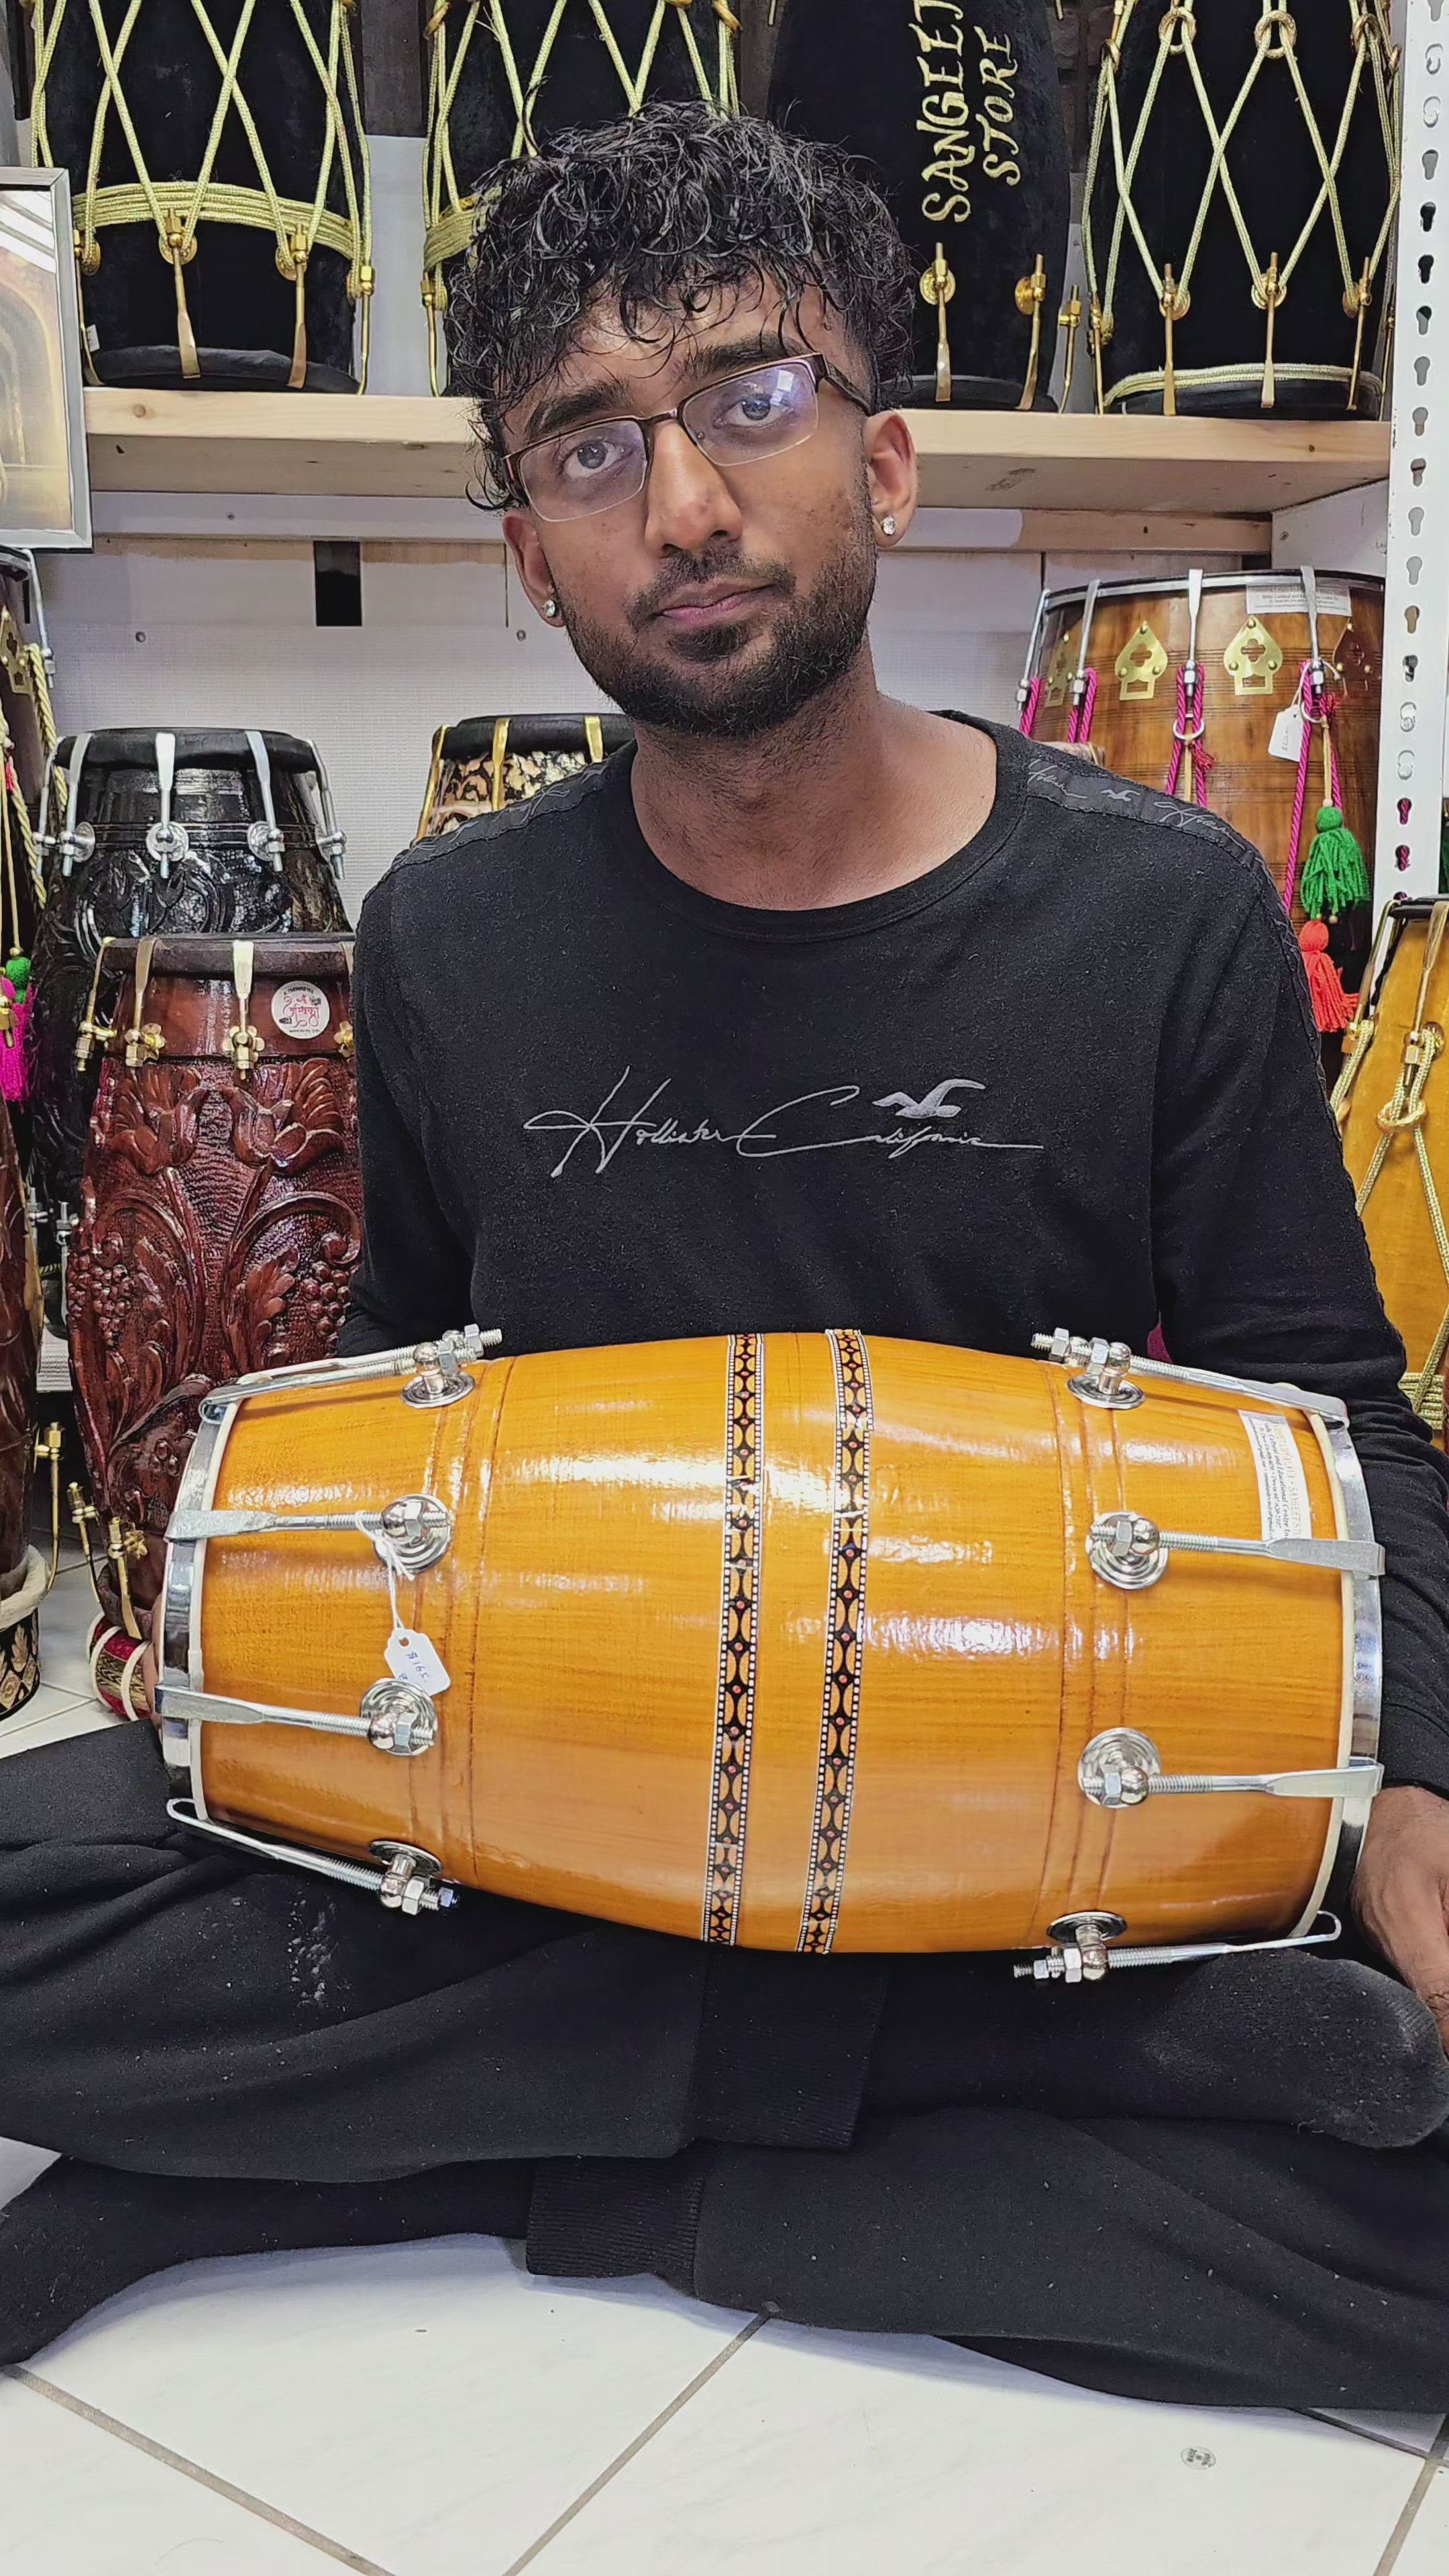 Authentic Sounds: Traditional Student Quality Dholak with Chrome Bolts, Rim Ring, and Handle